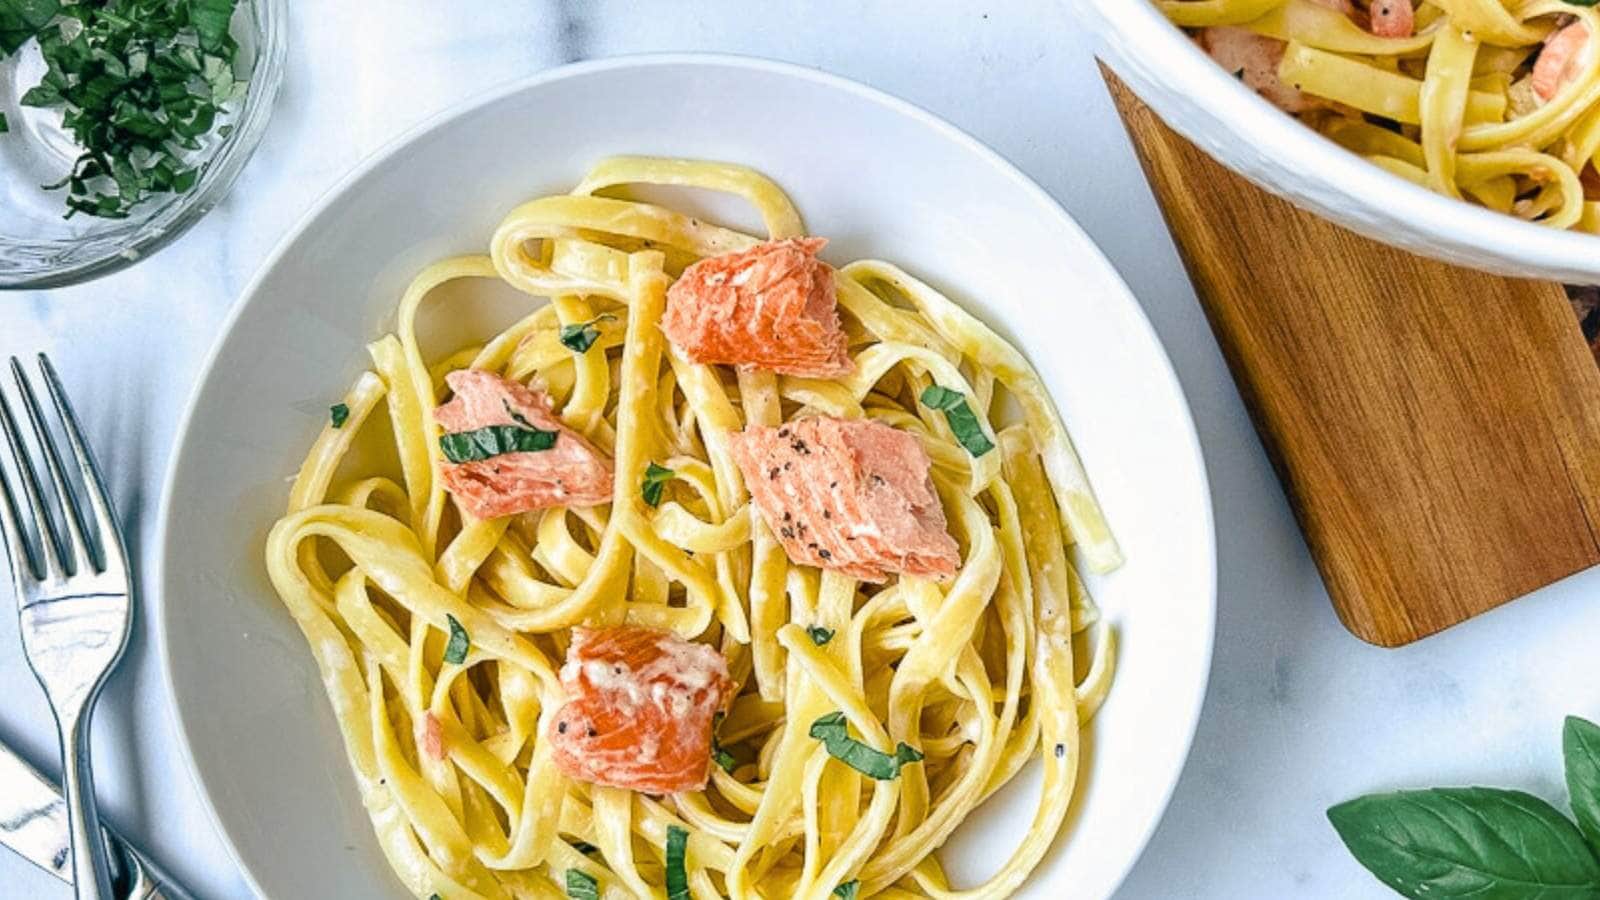 Salmon Alfredo recipe by The Feathered Nester.